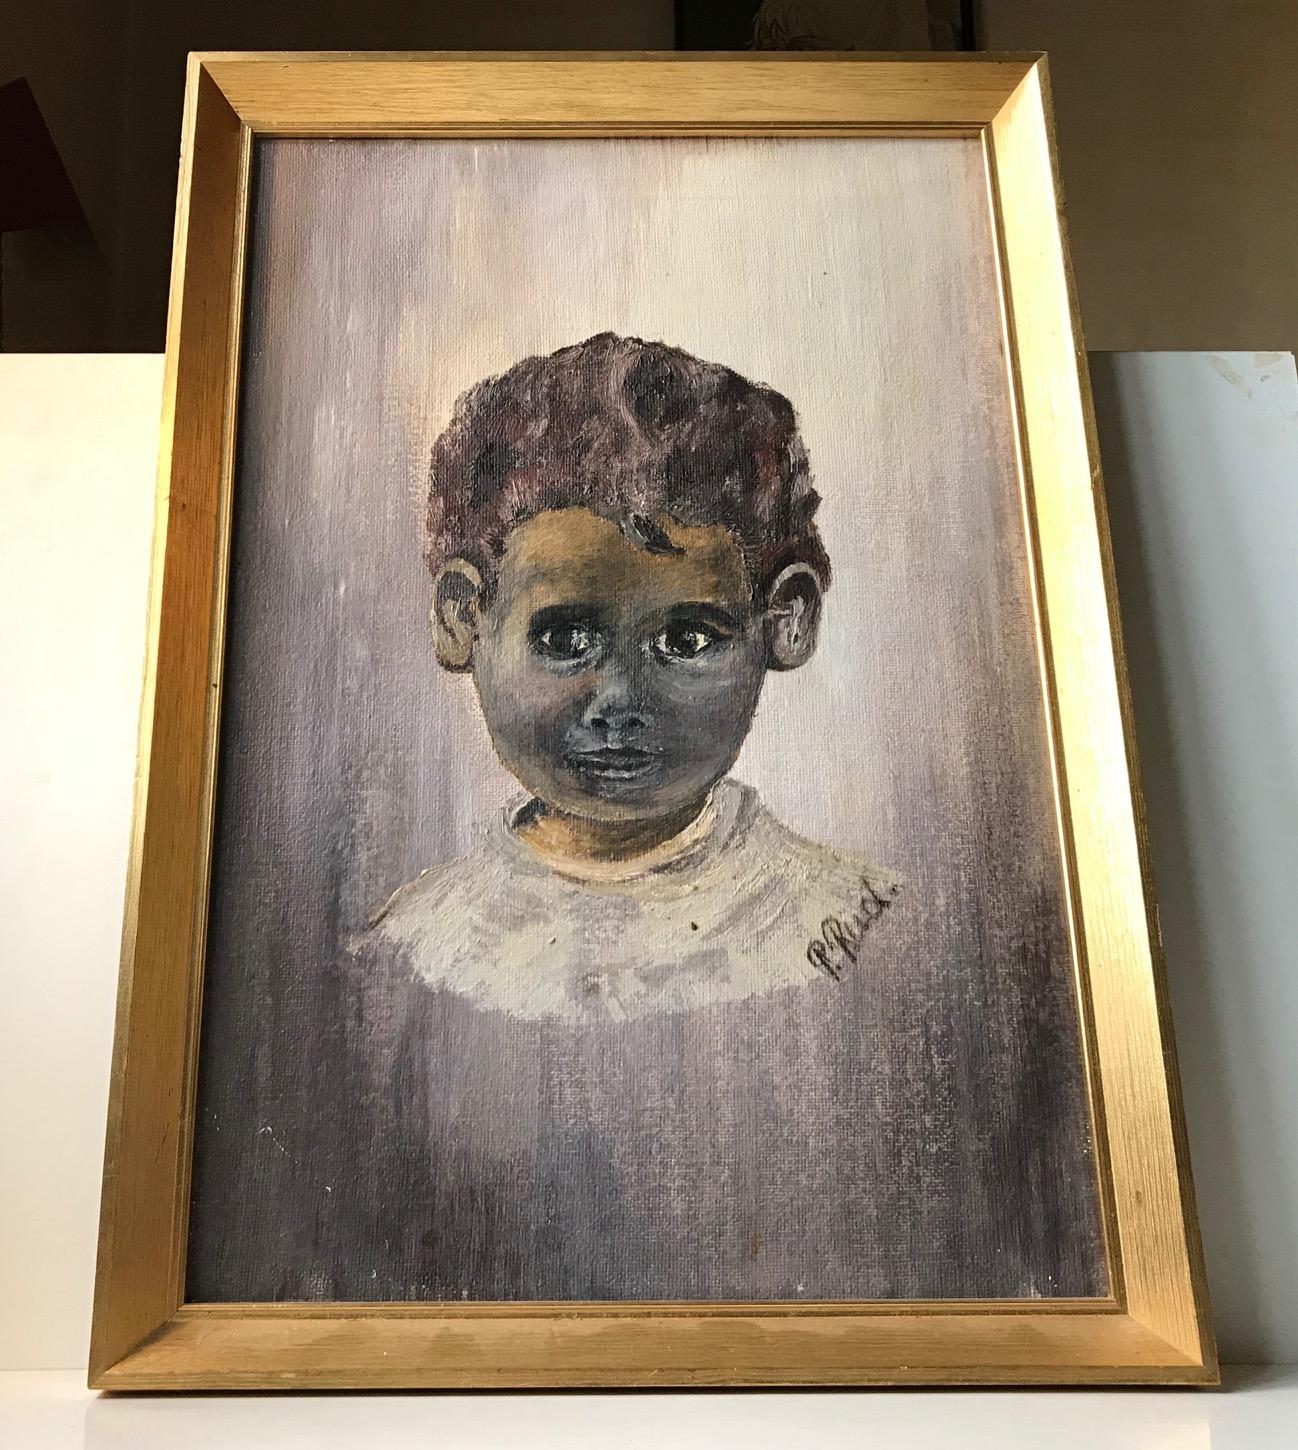 Contemporary portrait of Afghan boy. Executed partly in oil and acrylic paint. The artist P. Rüd are rather unknown outside Scandinavia. The painting is professionally framed.